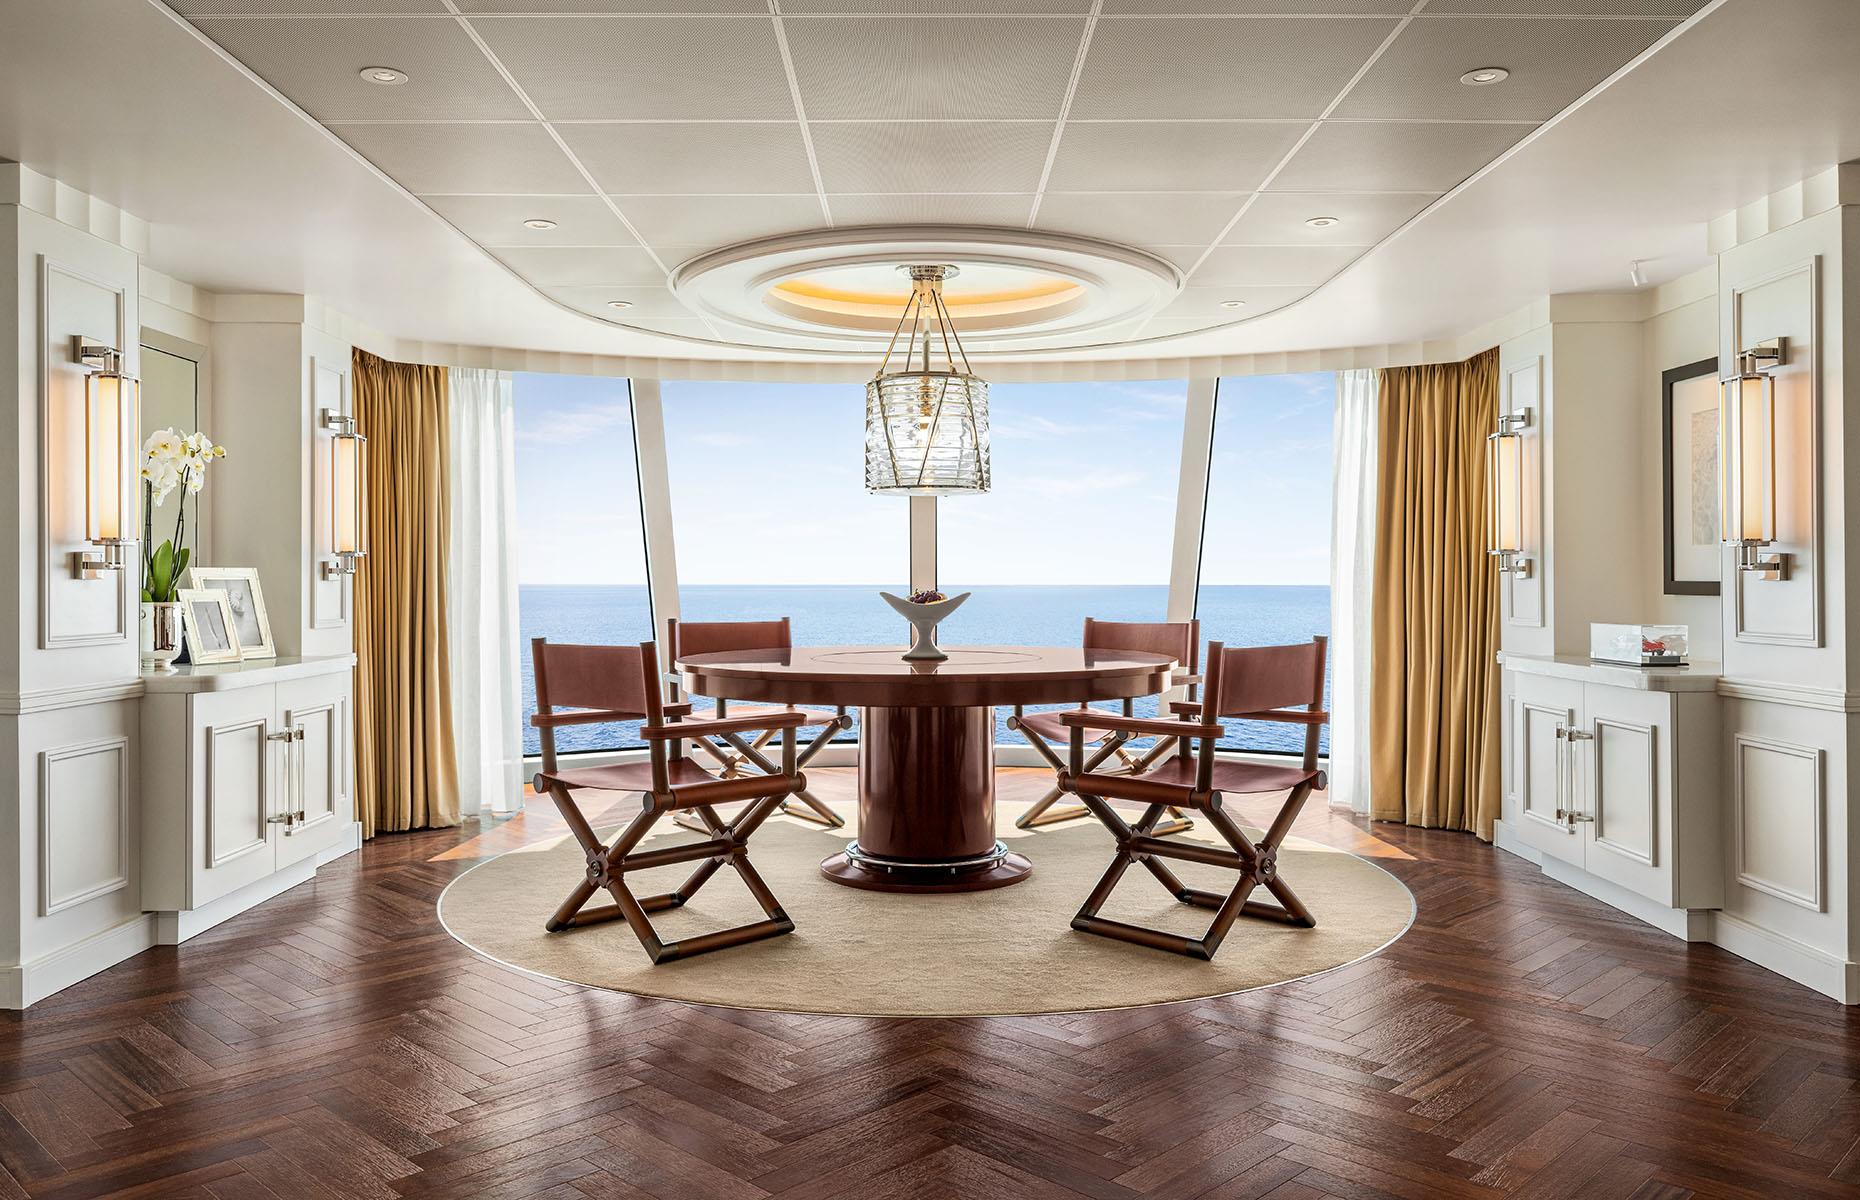 <p>Fine dining, world class spas and cocktails on tap – there’s no doubt that cruising is an indulgent and glamorous way to travel, with many modern vessels compared to floating hotels. But some cruise ships take seafaring in style to the next level.</p>  <p><strong>Think personal butlers, complimentary Champagne and private hot tubs, as we tour around the luxurious cruise ship staterooms only the super-rich can afford...</strong></p>  <p>*All prices correct at time of writing.</p>